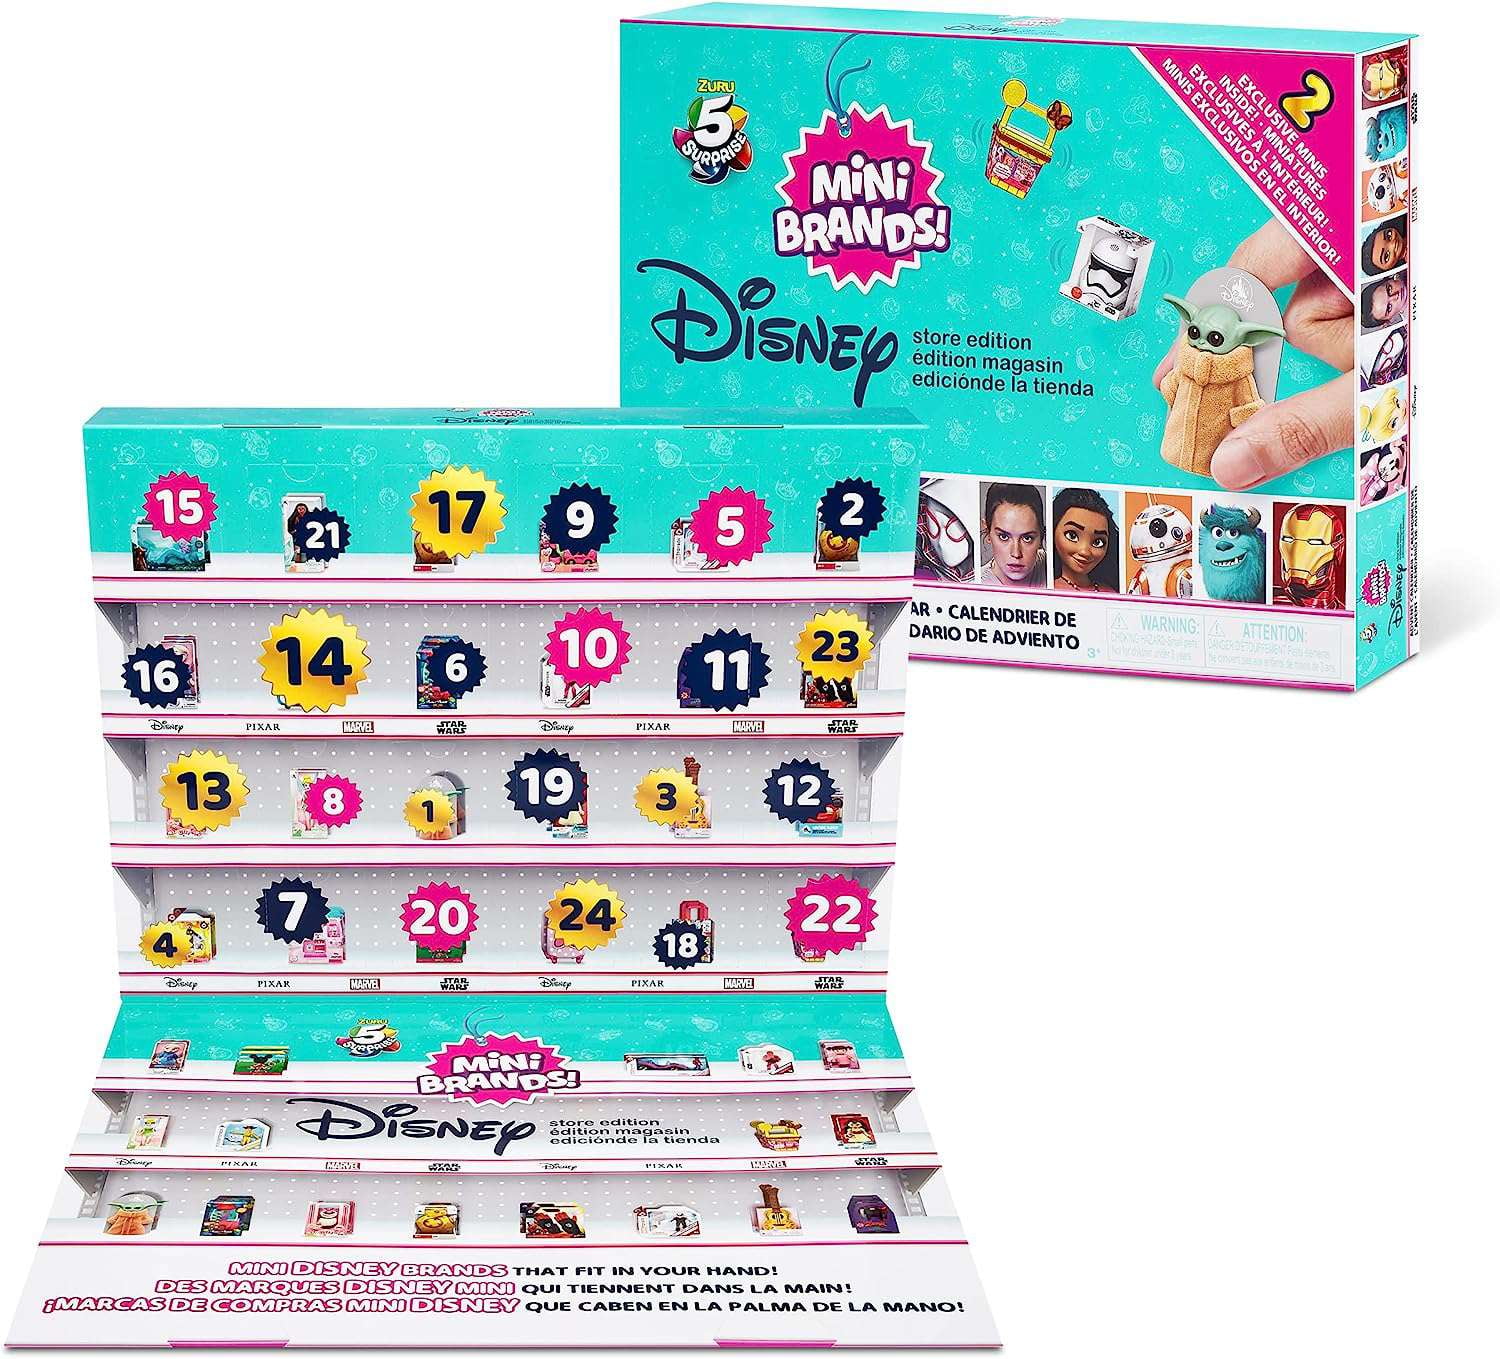 Part 2: Days 13-24 of the $15 Mini Brands Advent Calendar from 5 Below